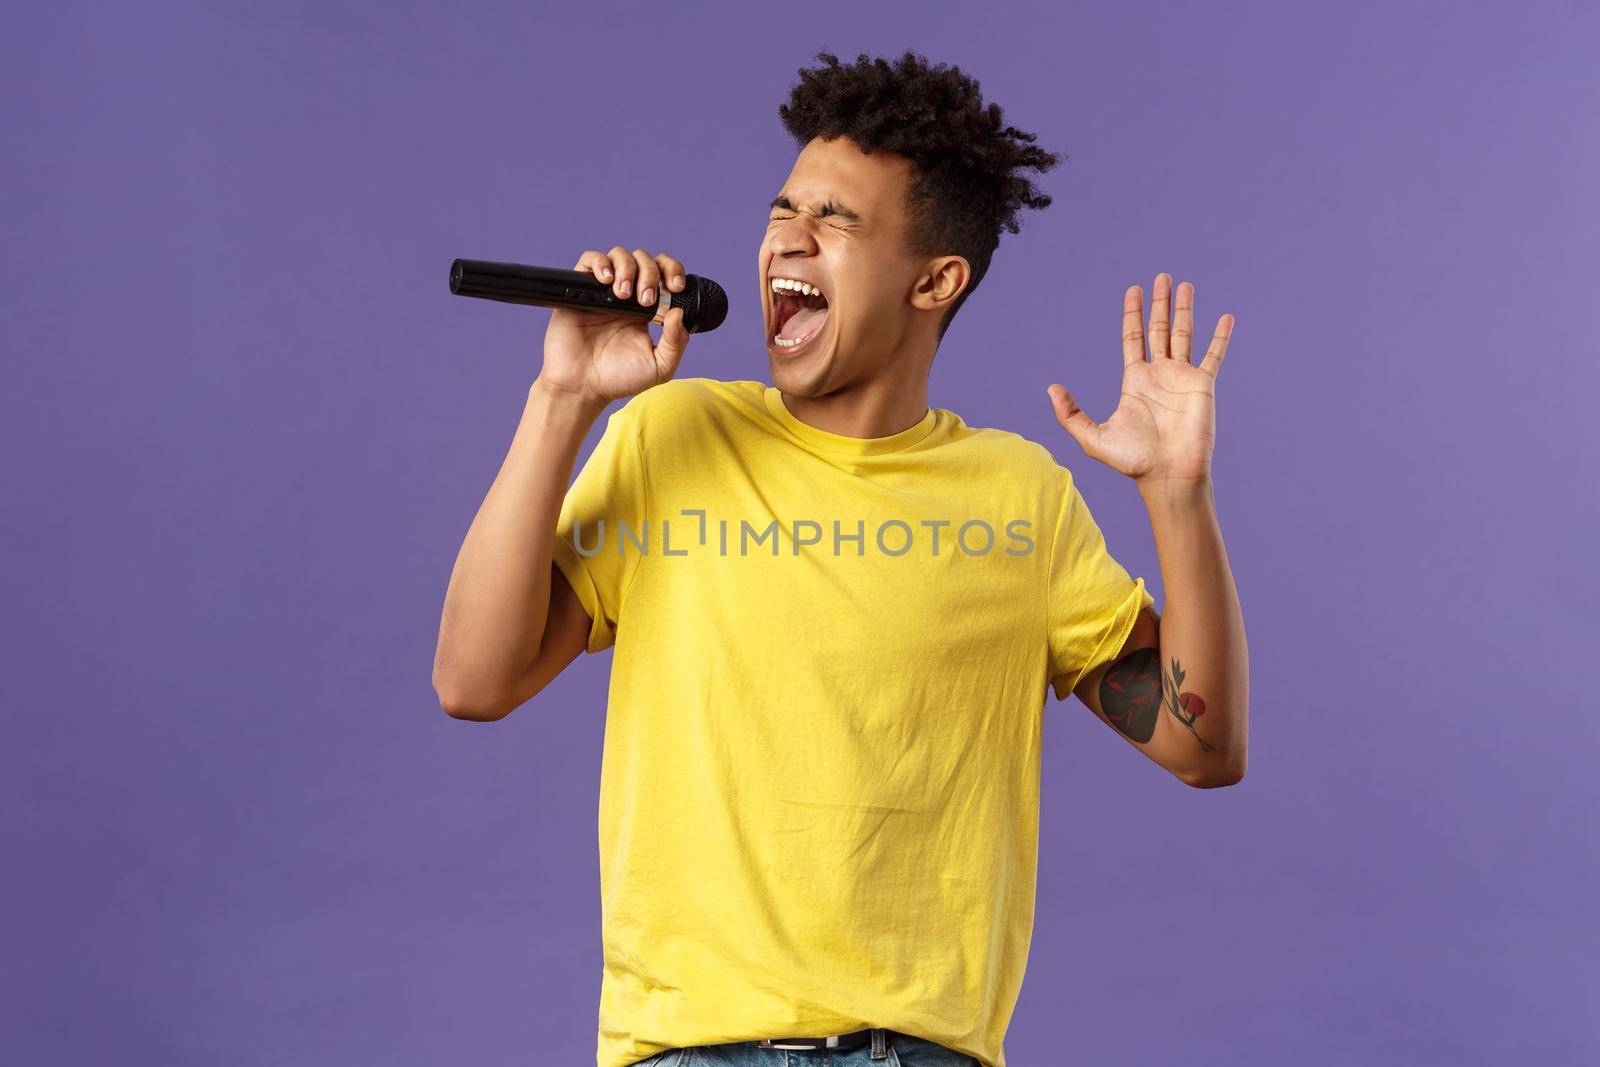 Portrait of passionate carefree young hispanic singer with dreads and tattoos, reaching highest note in song, raising hand up singing loud at microphone with closed eyes, purple background.